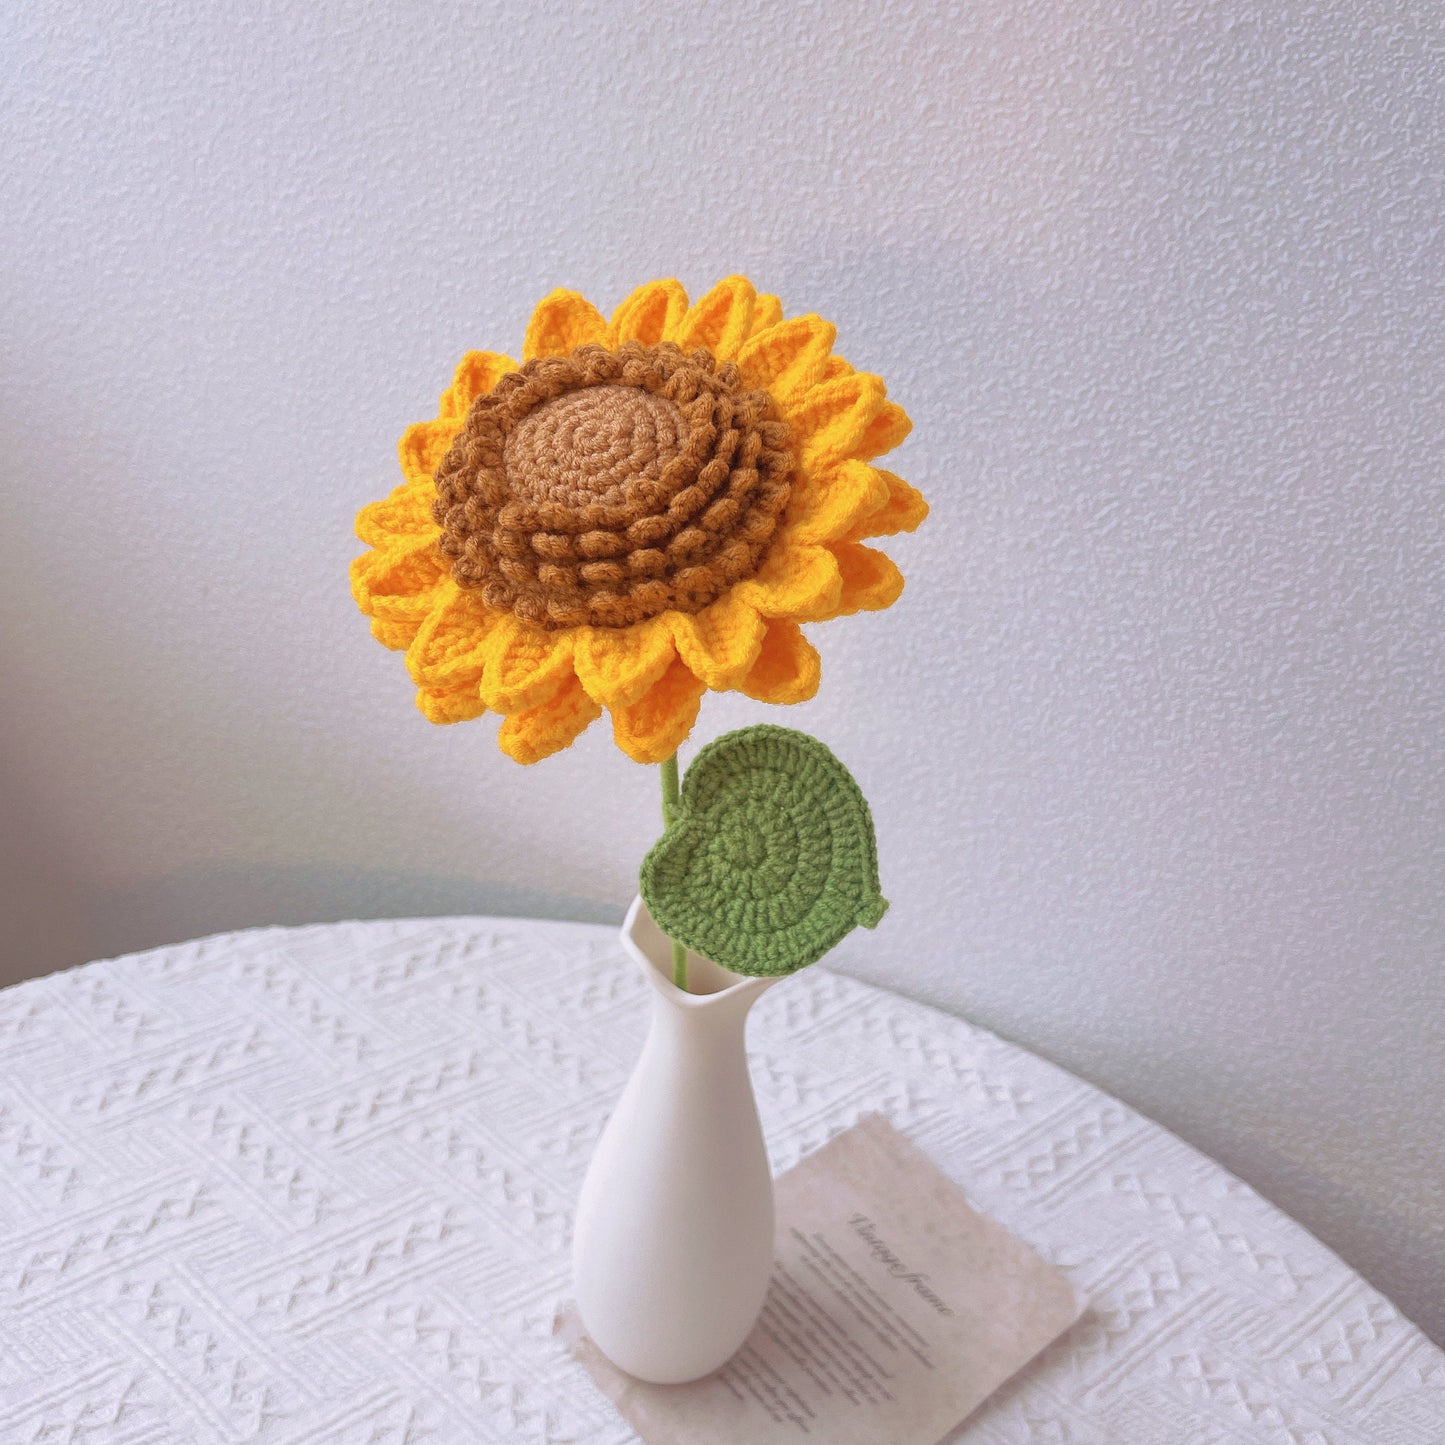 Handmade Crochet Sunflowers - Forever Perfect Yarn Craft for Home Decor & Gift Ideas. Bright, Cheerful Symbolic Flower to Brighten Your Day